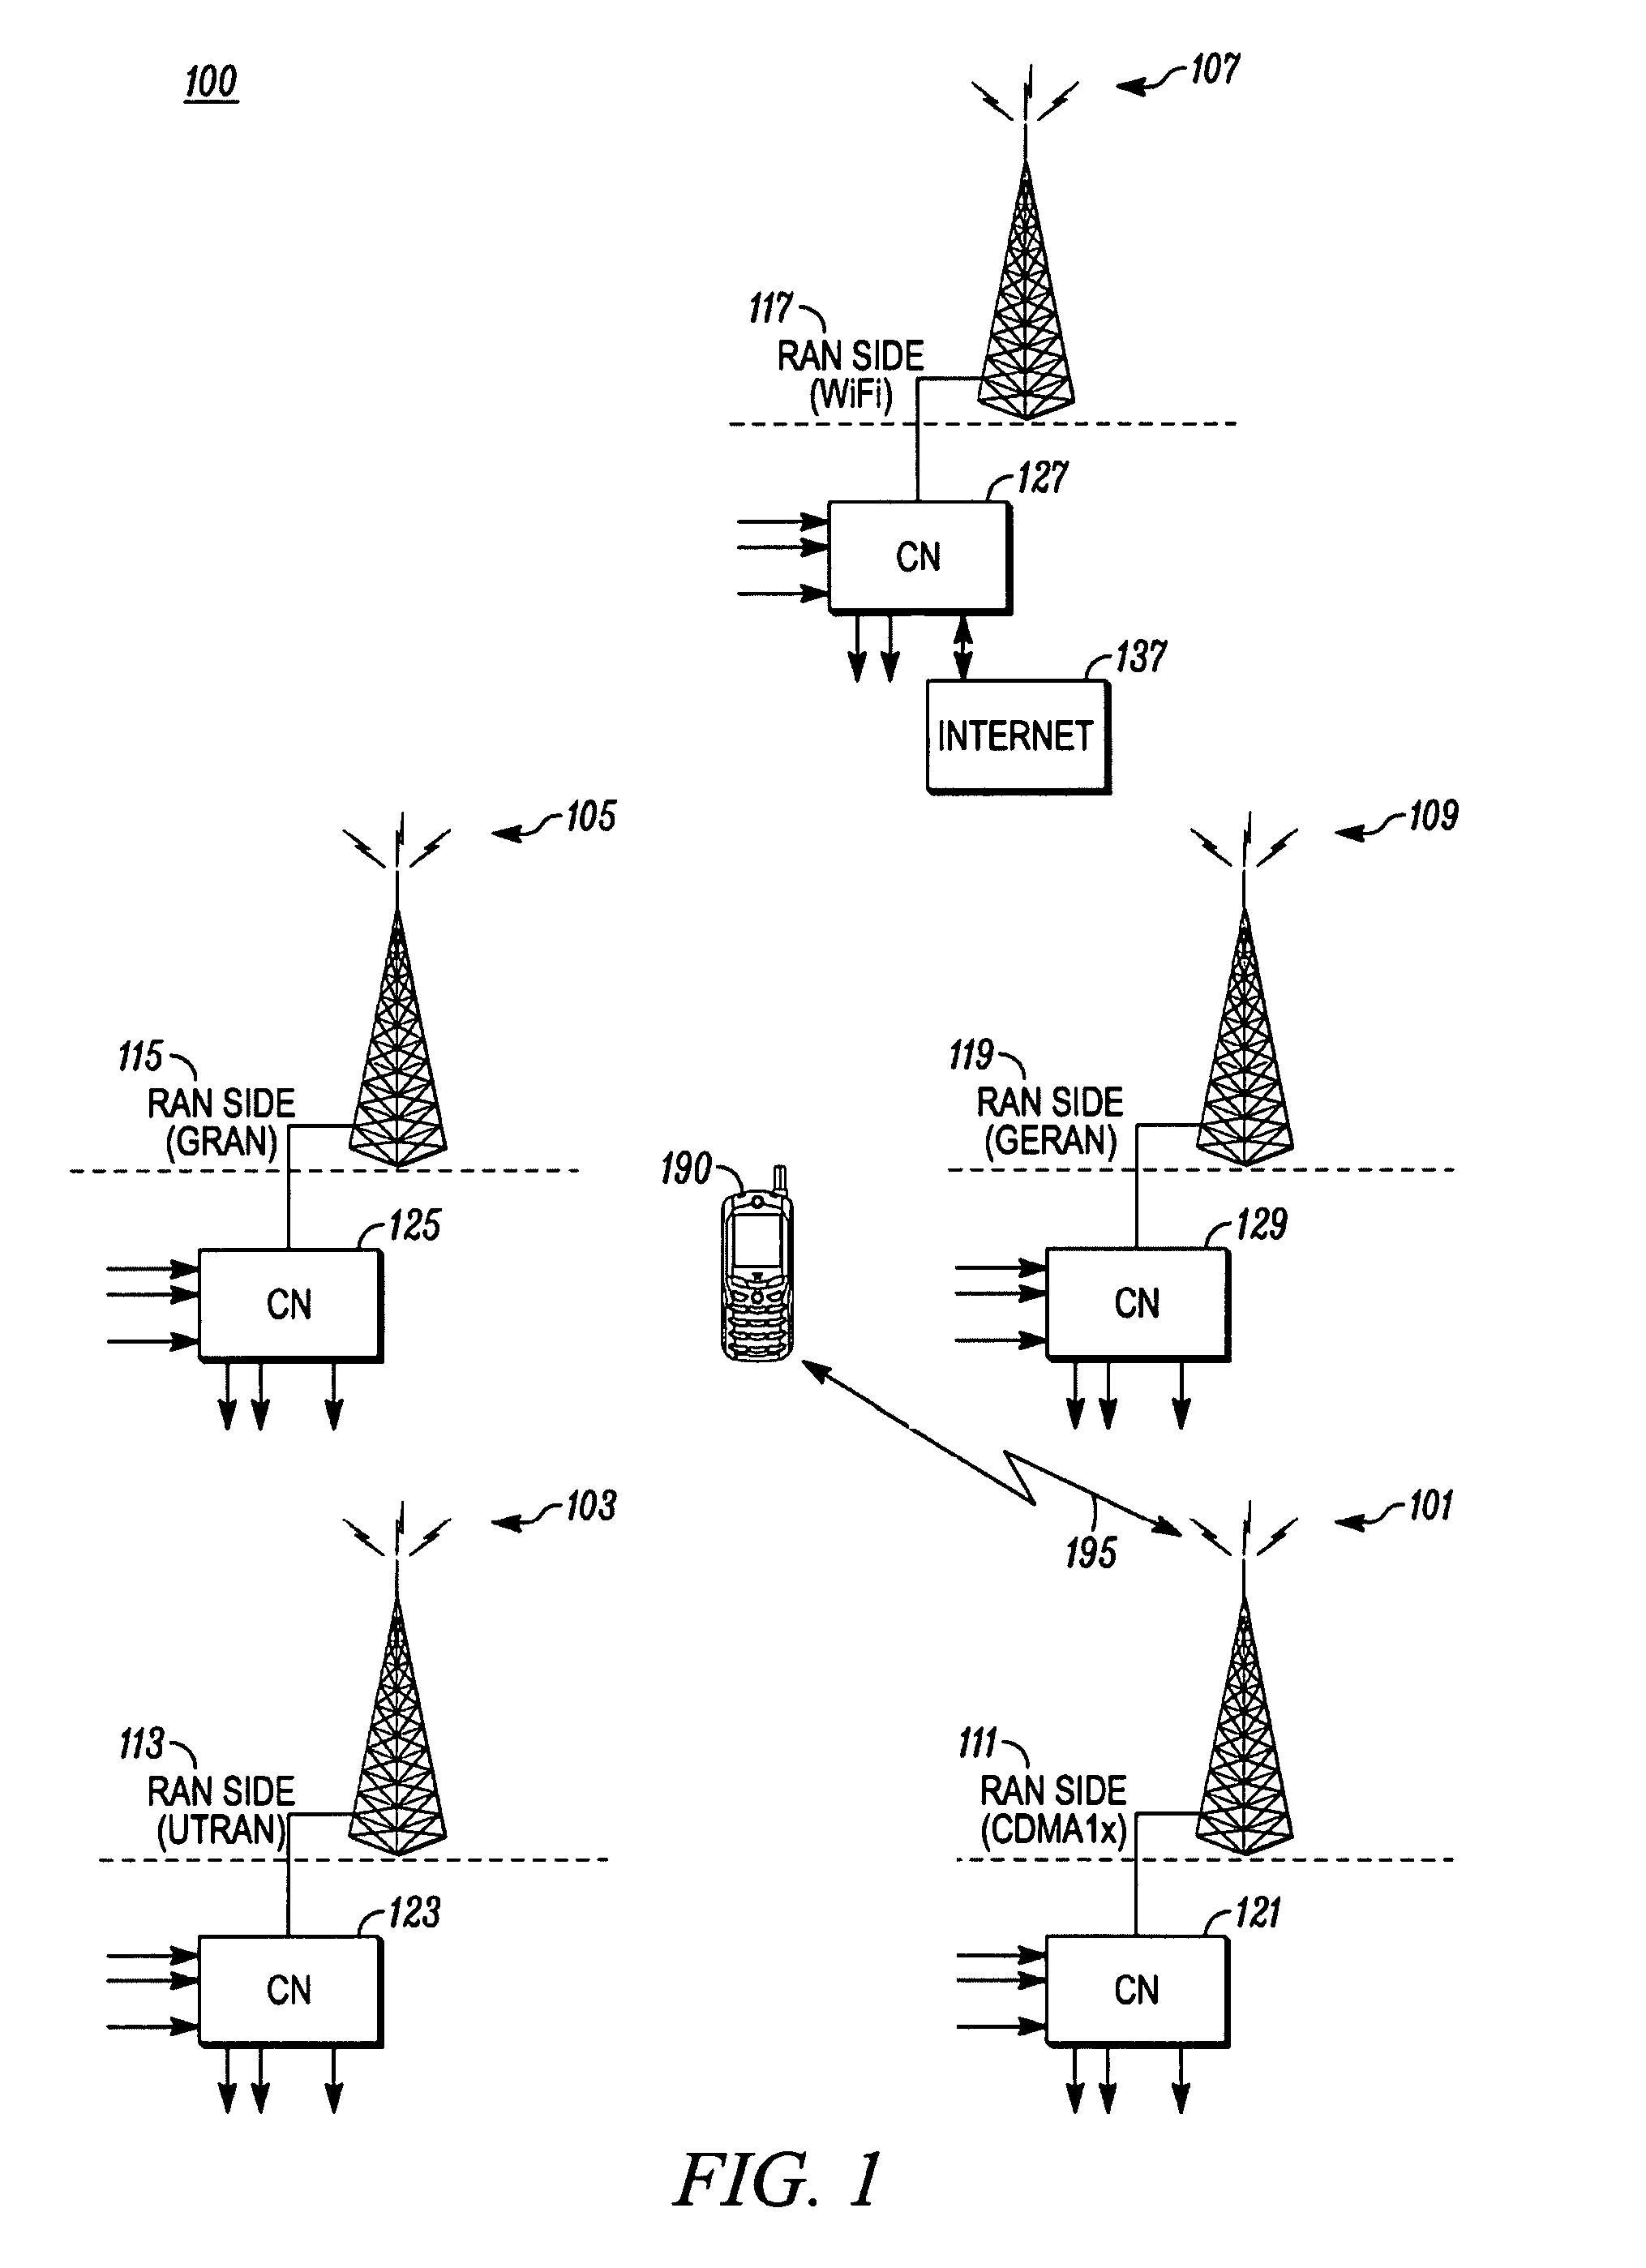 Method and apparatus for detecting an alternate wireless communication network